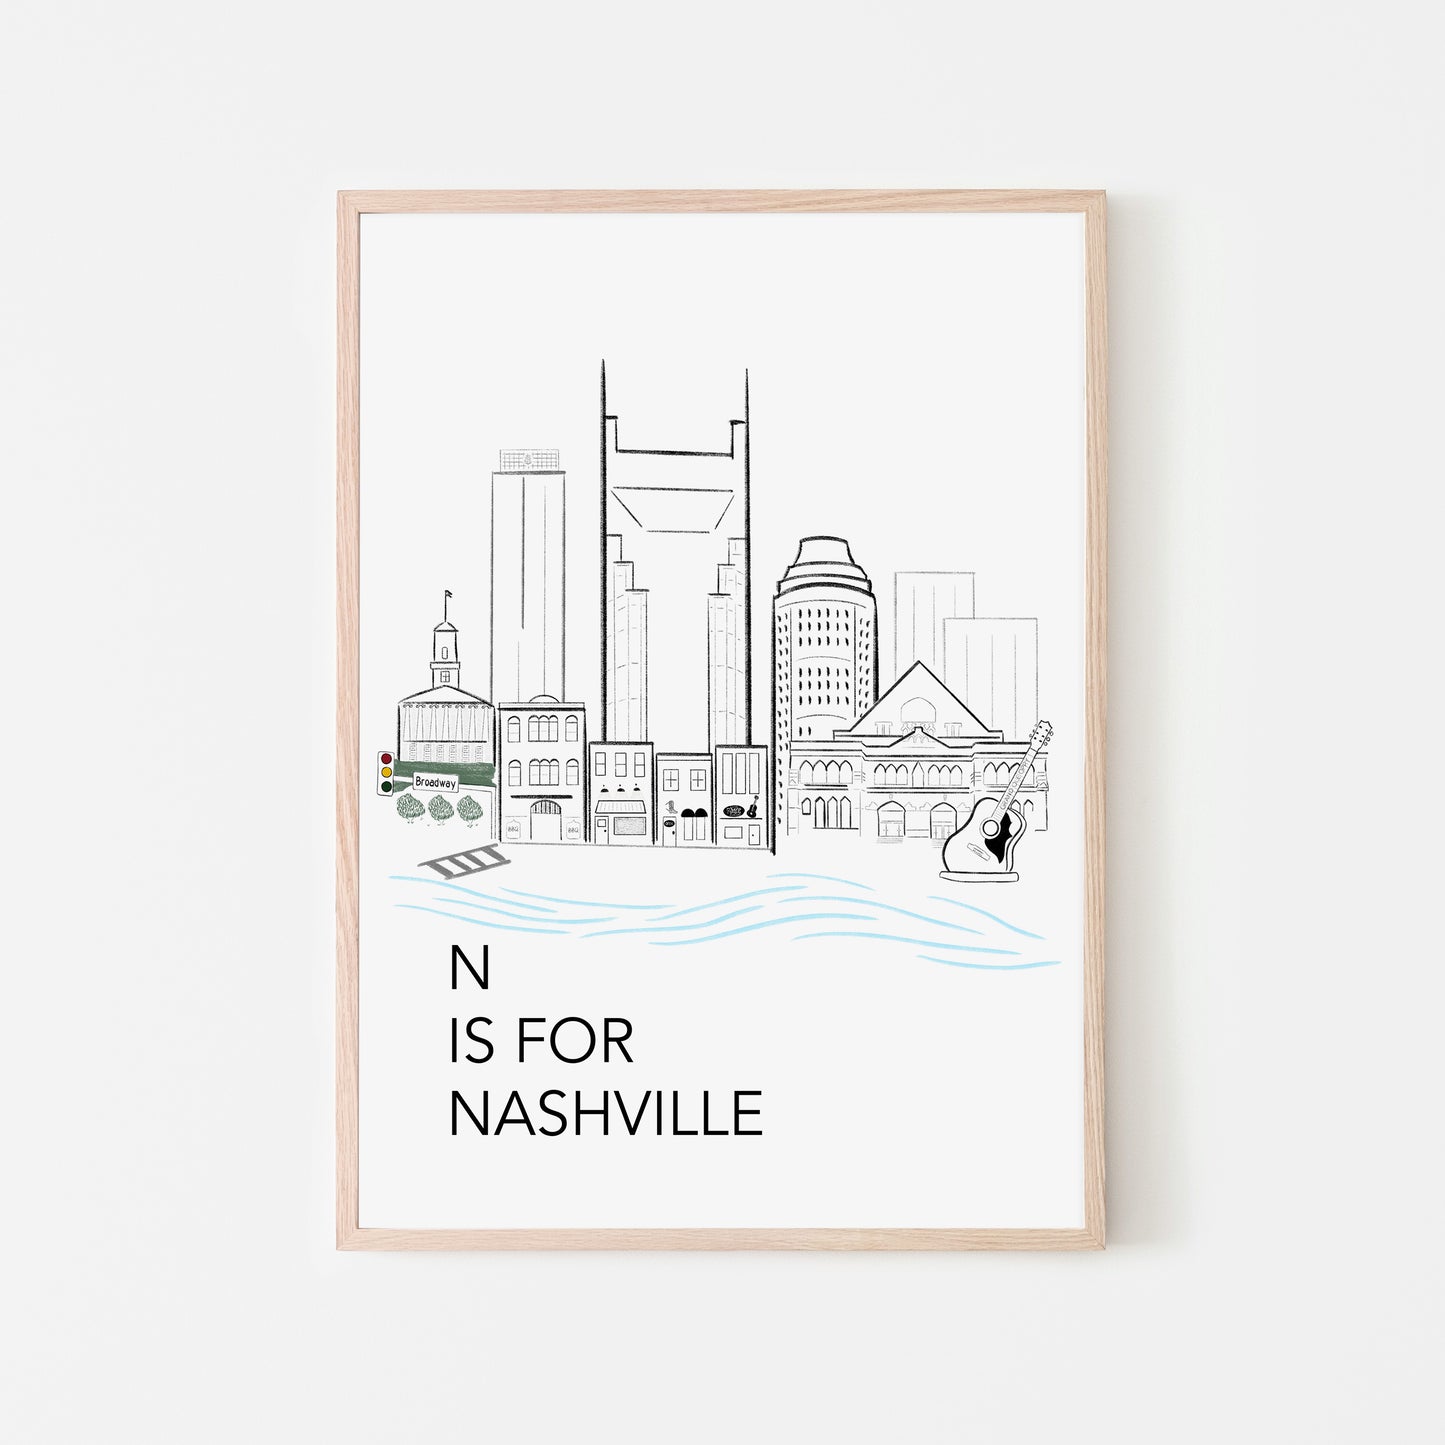 N is for Nashville Art print in black and white colors for baby nursery room, kids bedroom or childs playroom